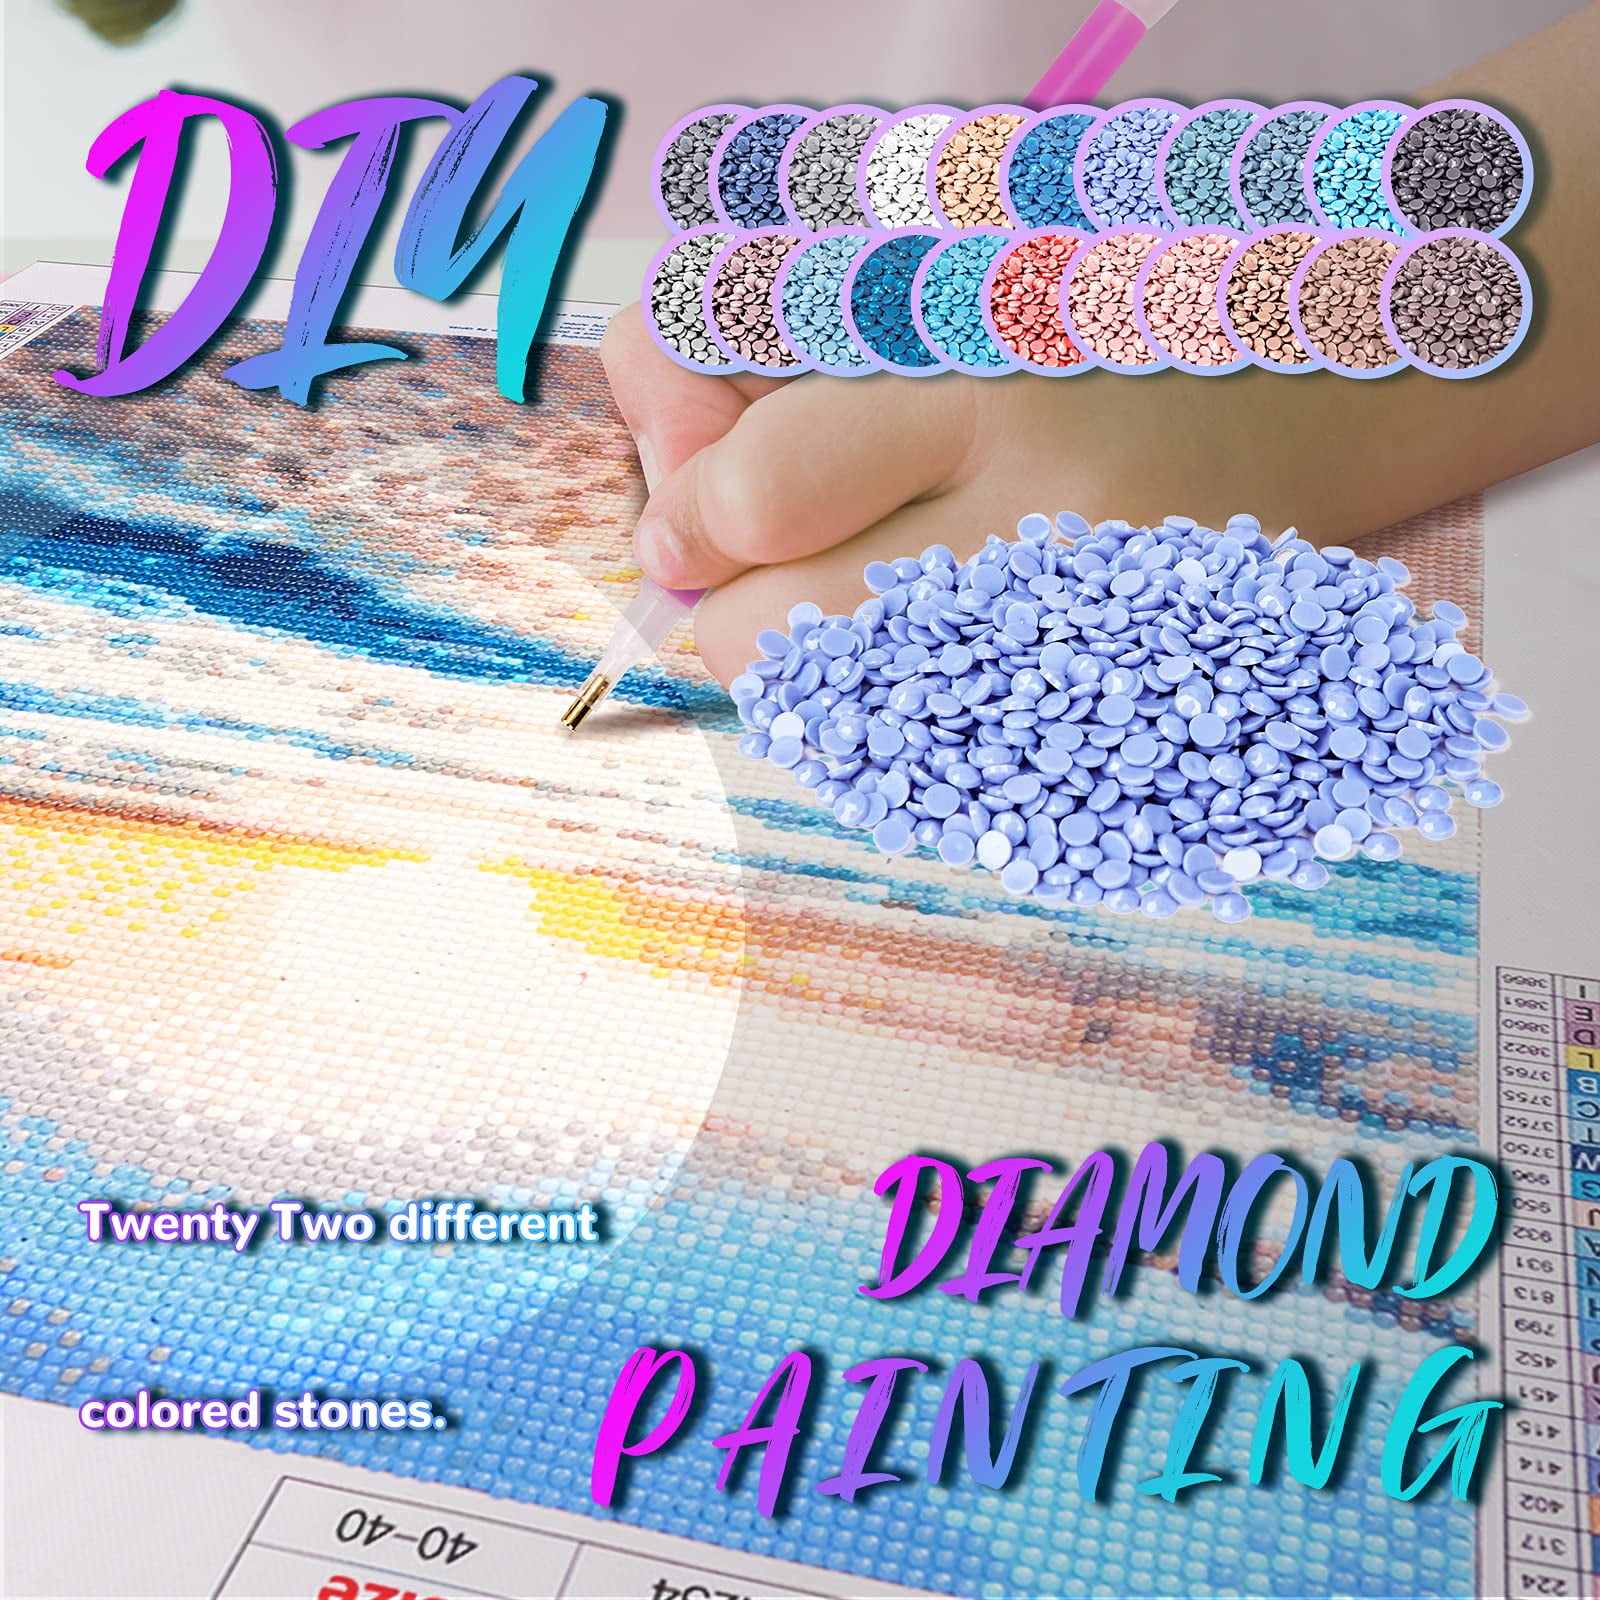 Dikence Crafts Gifts for 9 10 11 Years Old Girls, 5d Diamond Painting by  Numbers for Adult Kids Age 9-13 DIY Painting Kits for Girl Age 9 10 11 12  13